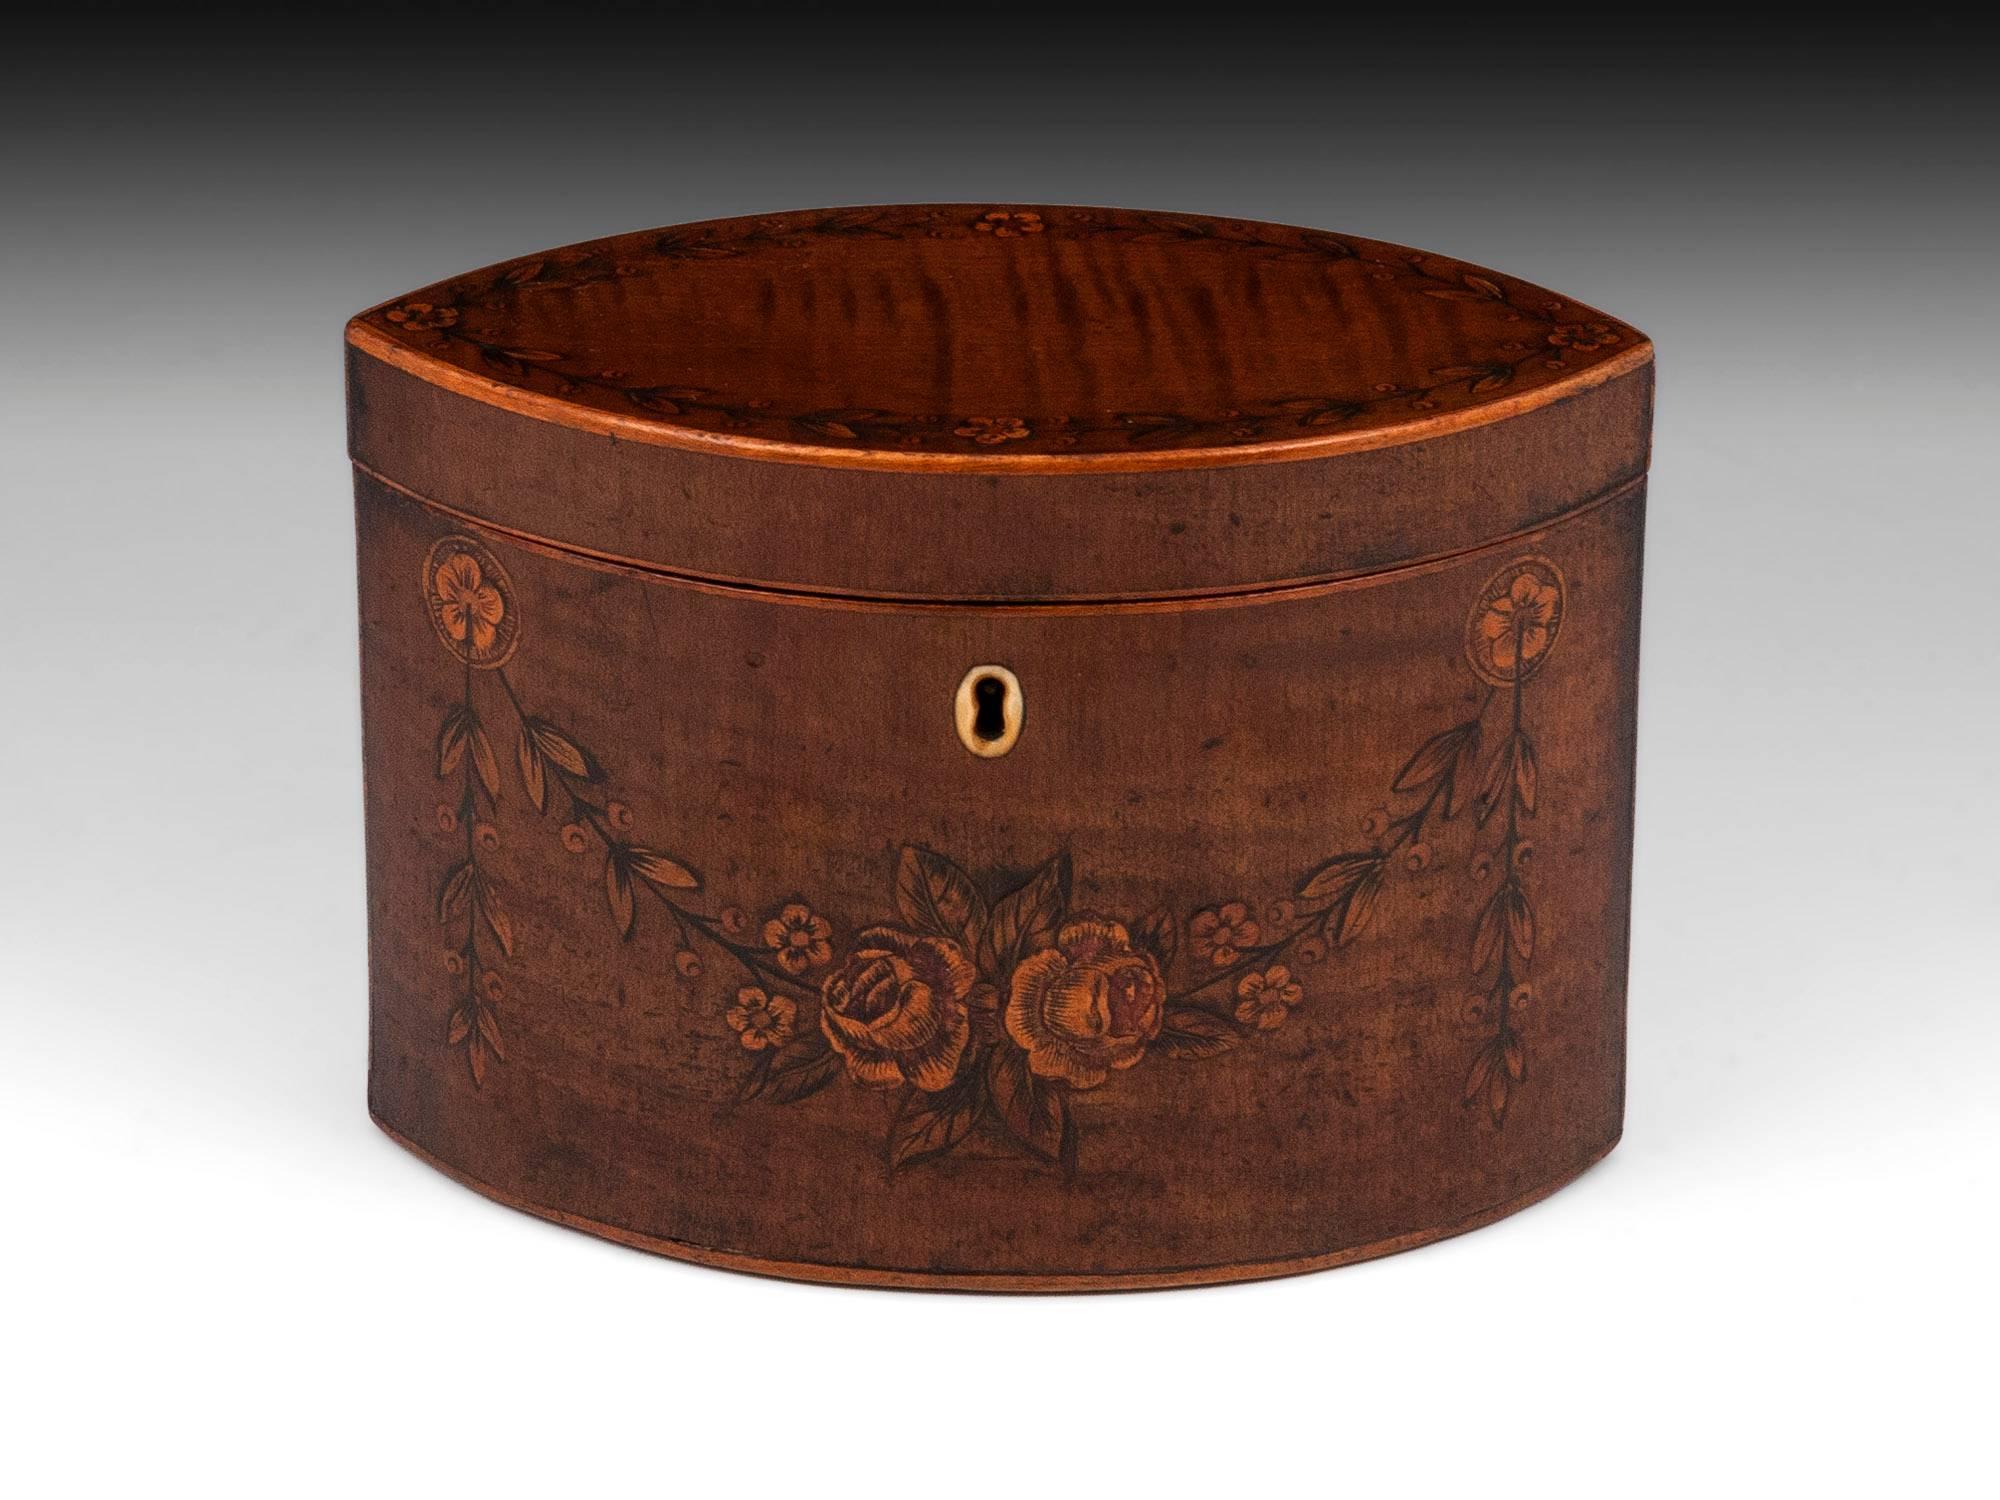 Harewood navette shaped tea caddy adorned with inlaid engraved flower garlands and bone escutcheon.

The navicular tea caddy's interior features a floating lid with brass handle, and contains traces of its original tin lining. 

This Georgian